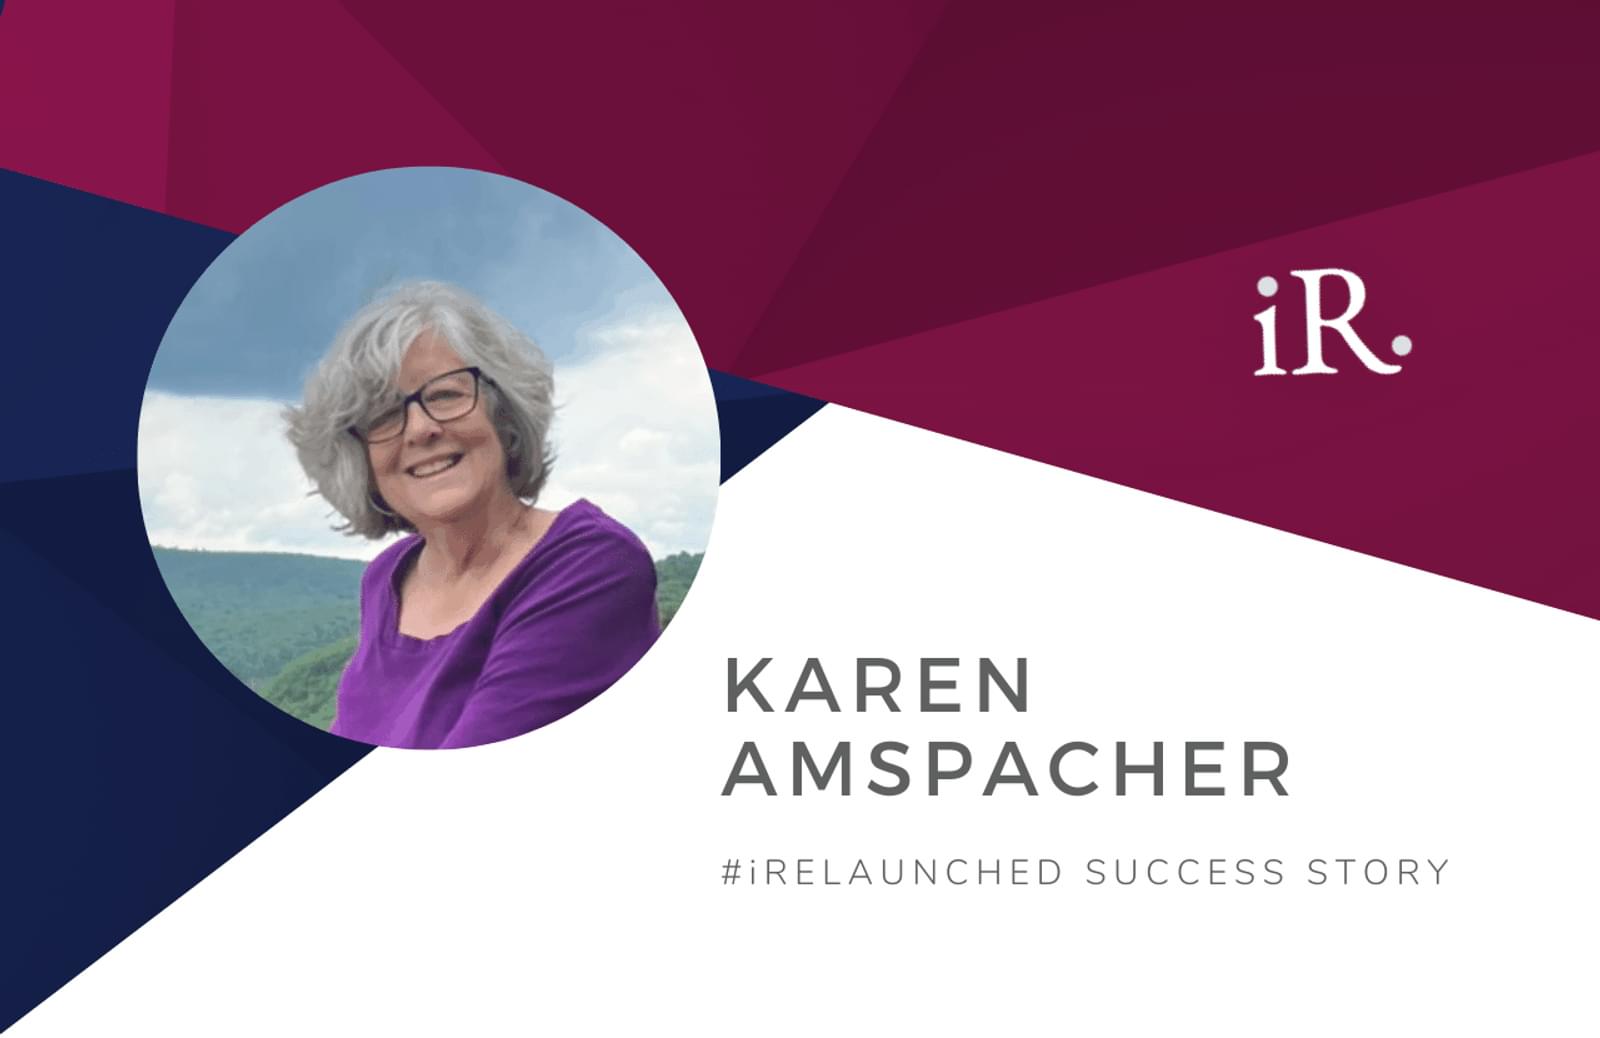 Karen Amspacher's headshot and the text #iRelaunched Success Story along with the iRelaunch logo.  A navy and maroon geometric textured background intersect behind Karen's headshot.